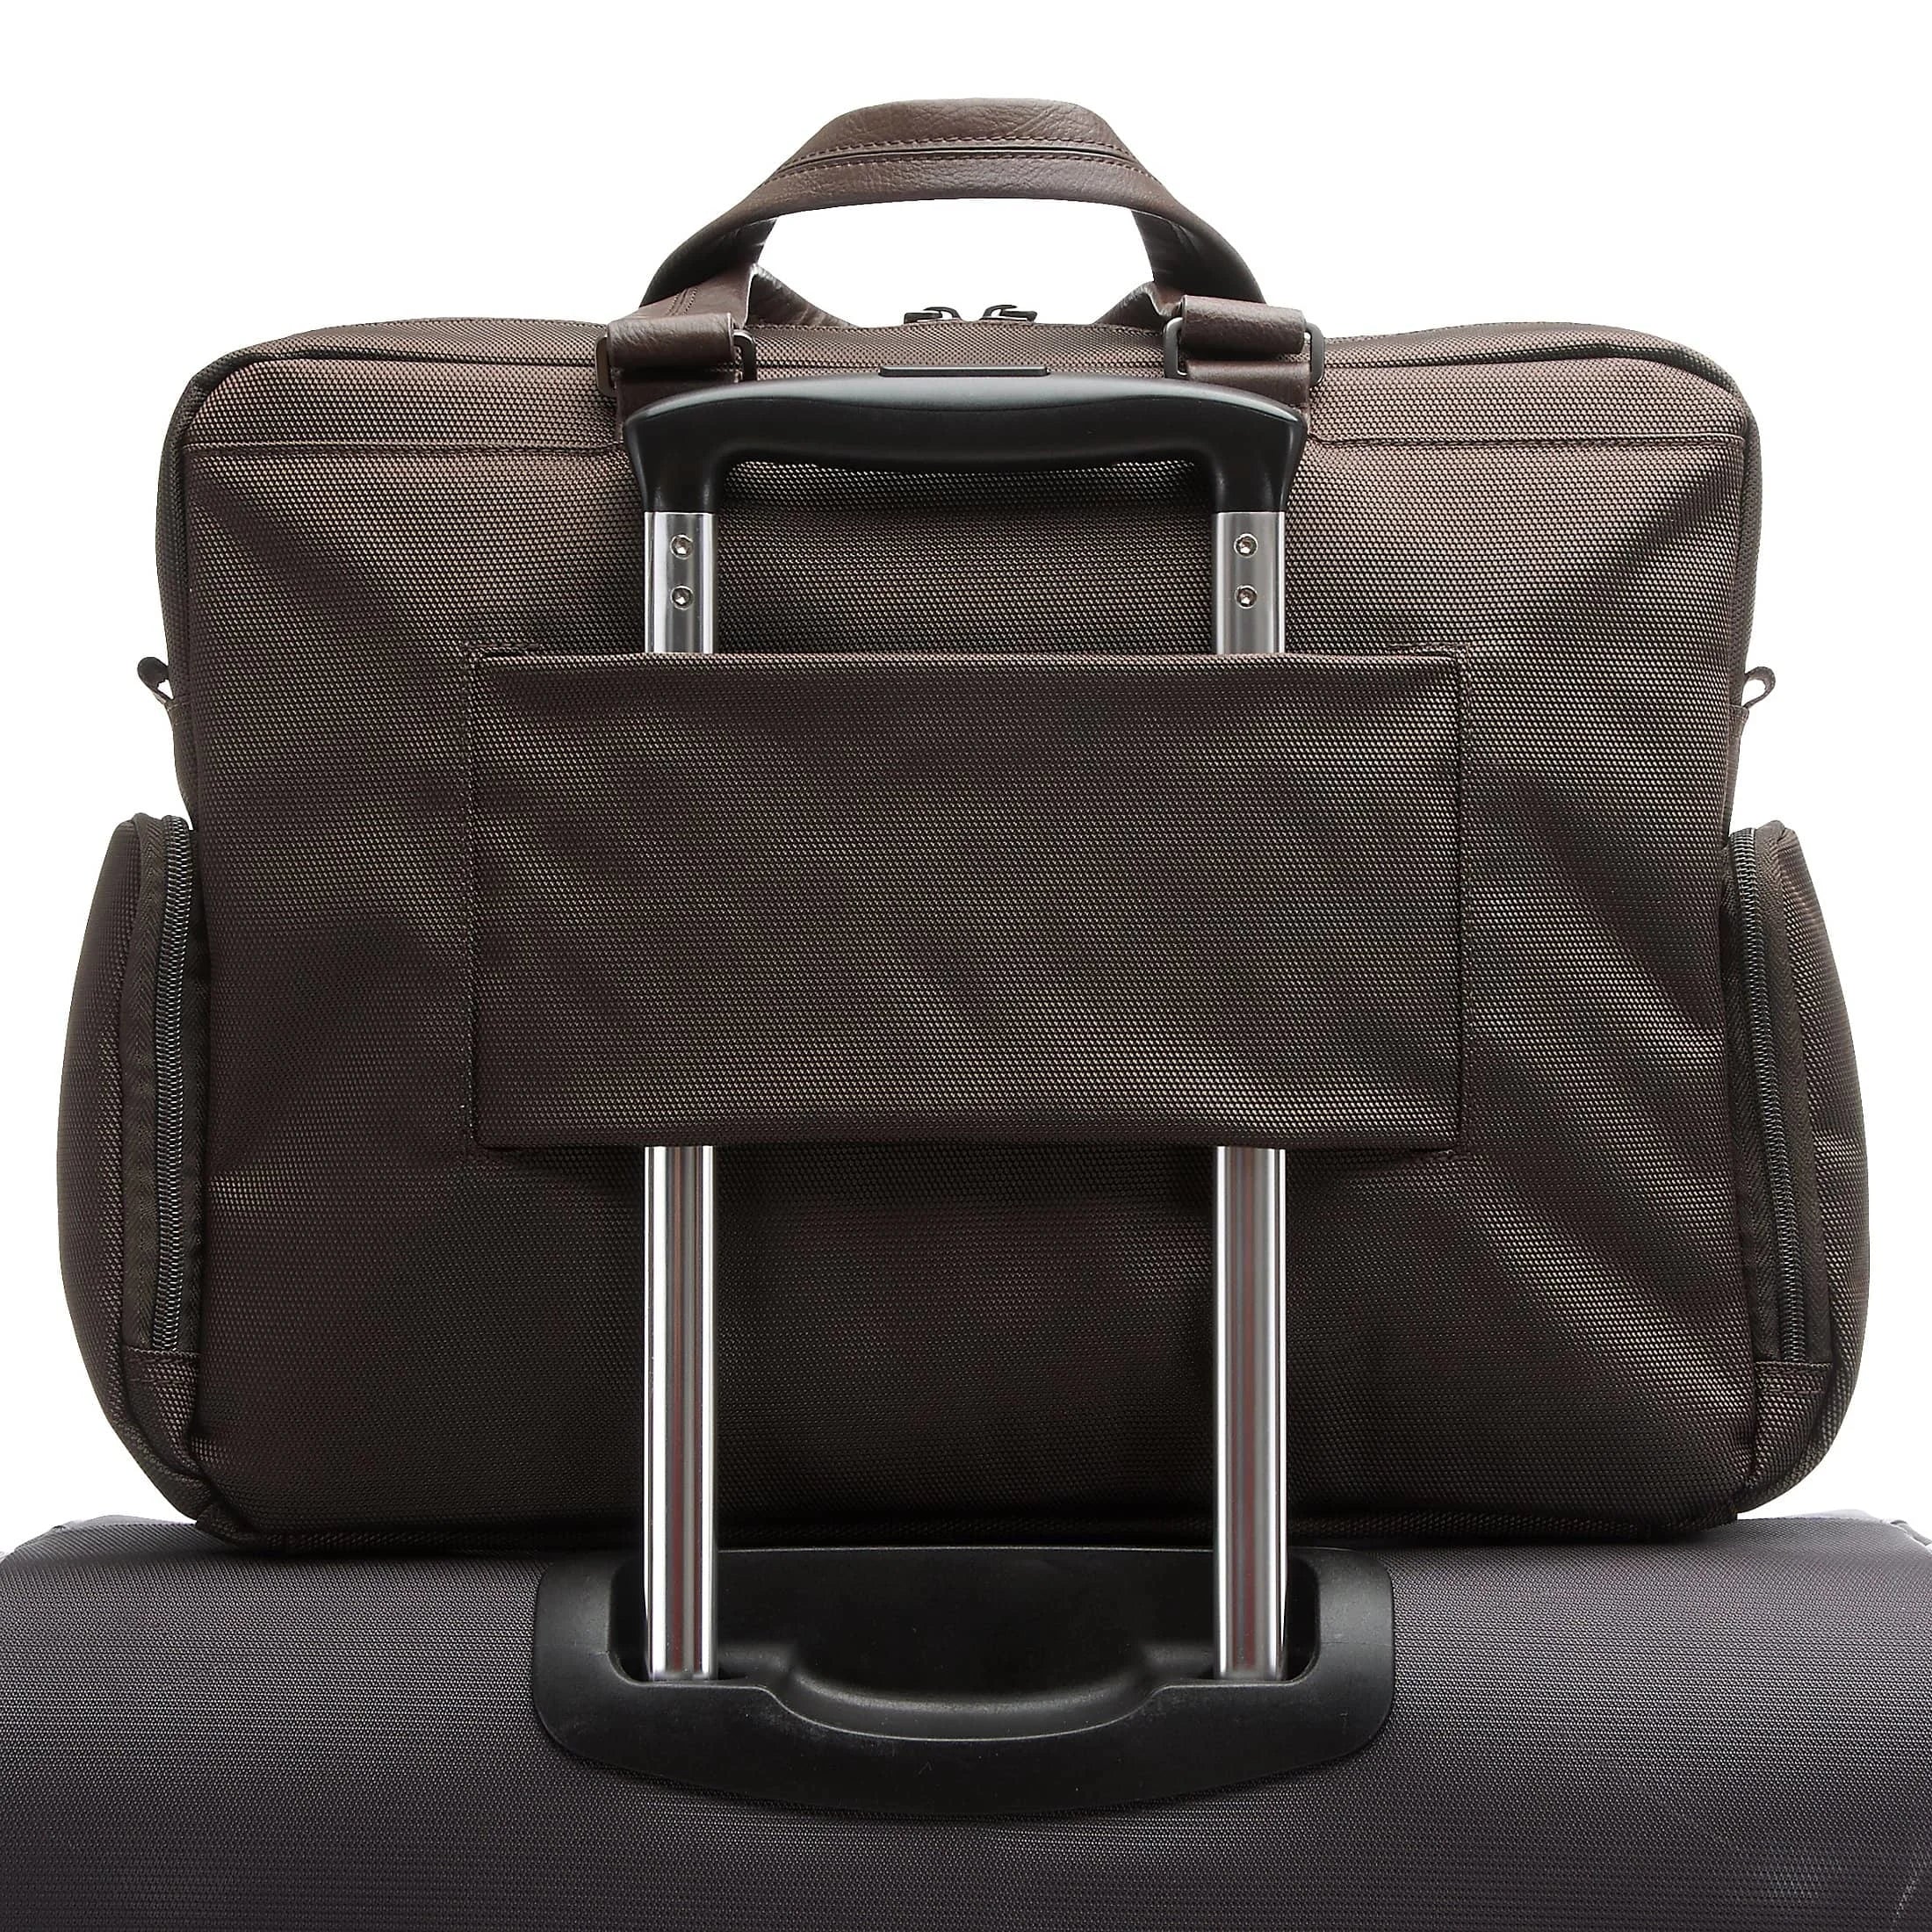 Roncato Wall Street briefcase 39 cm - brown